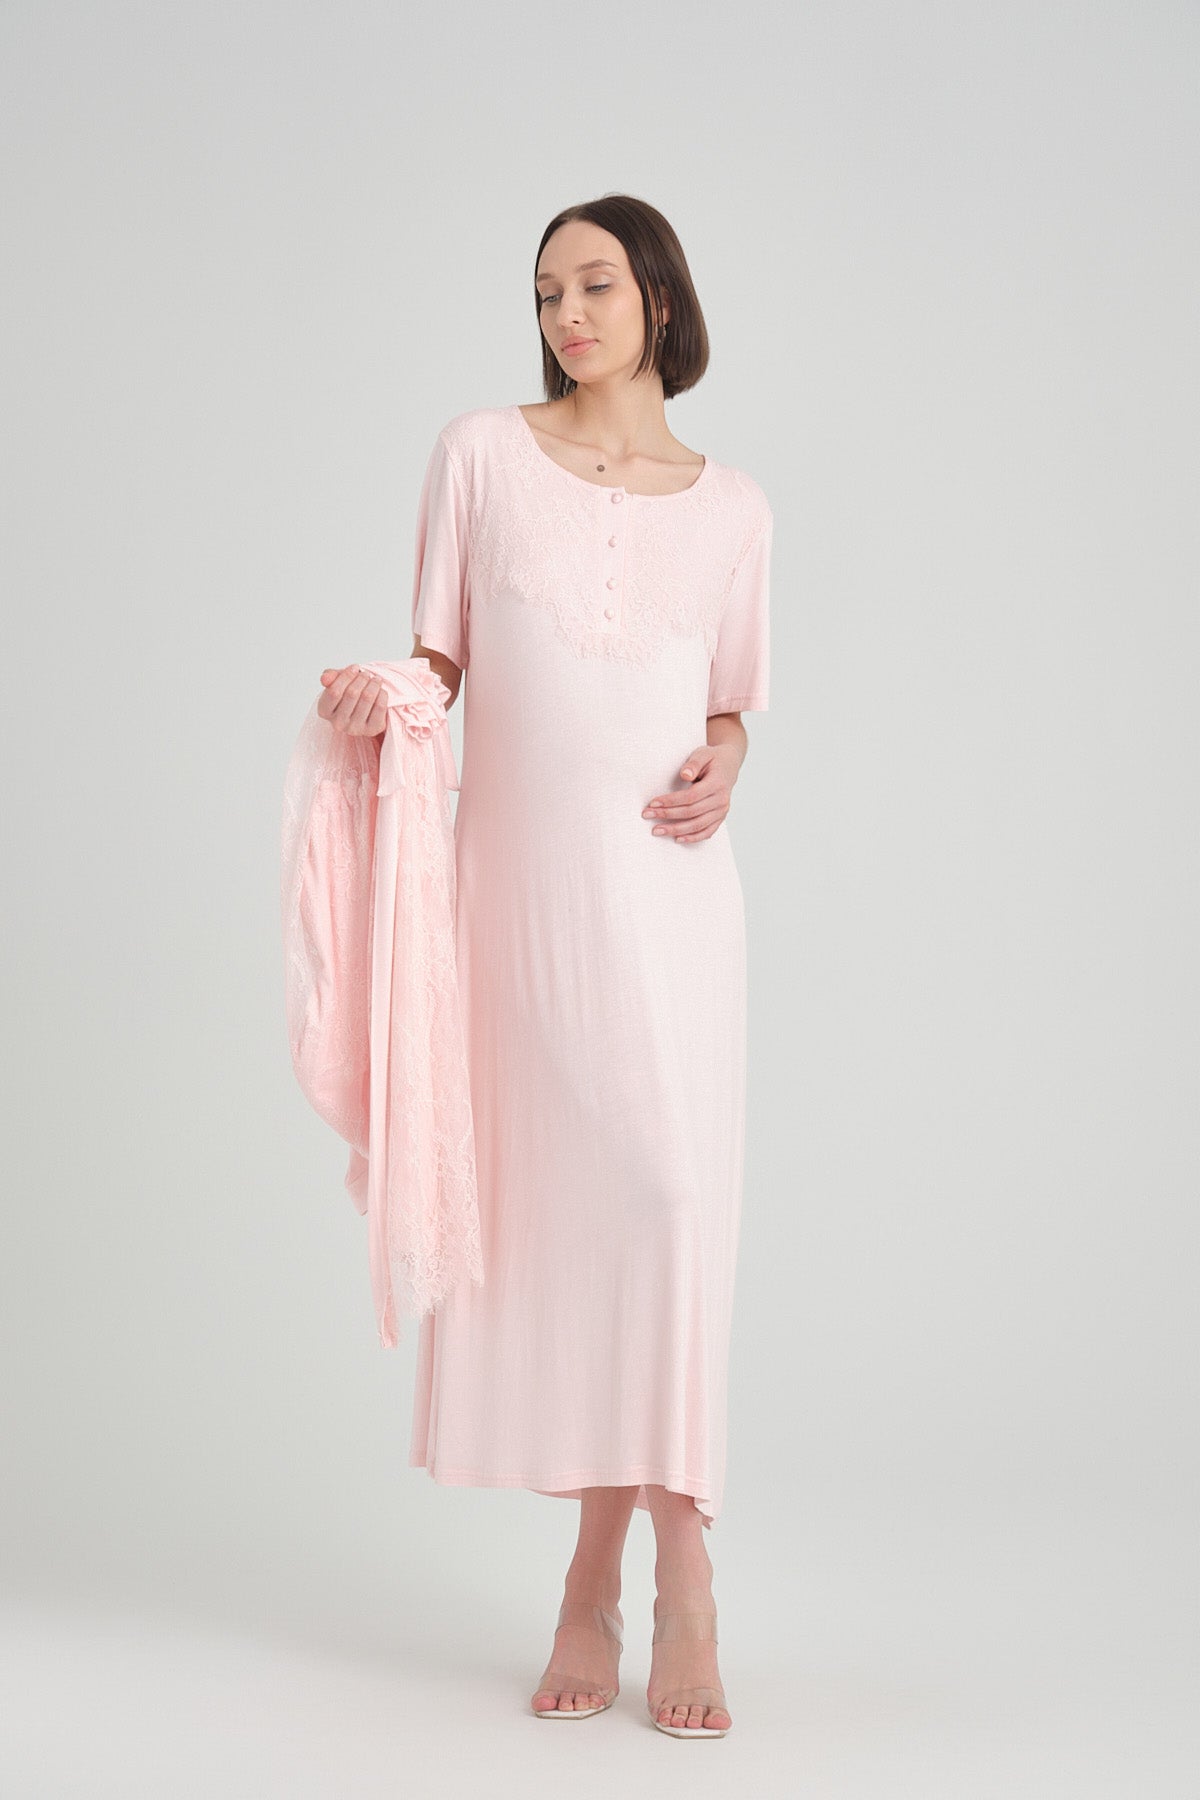 Shopymommy 2402 Lace Maternity & Nursing Nightgown With Embroidered Robe Pink